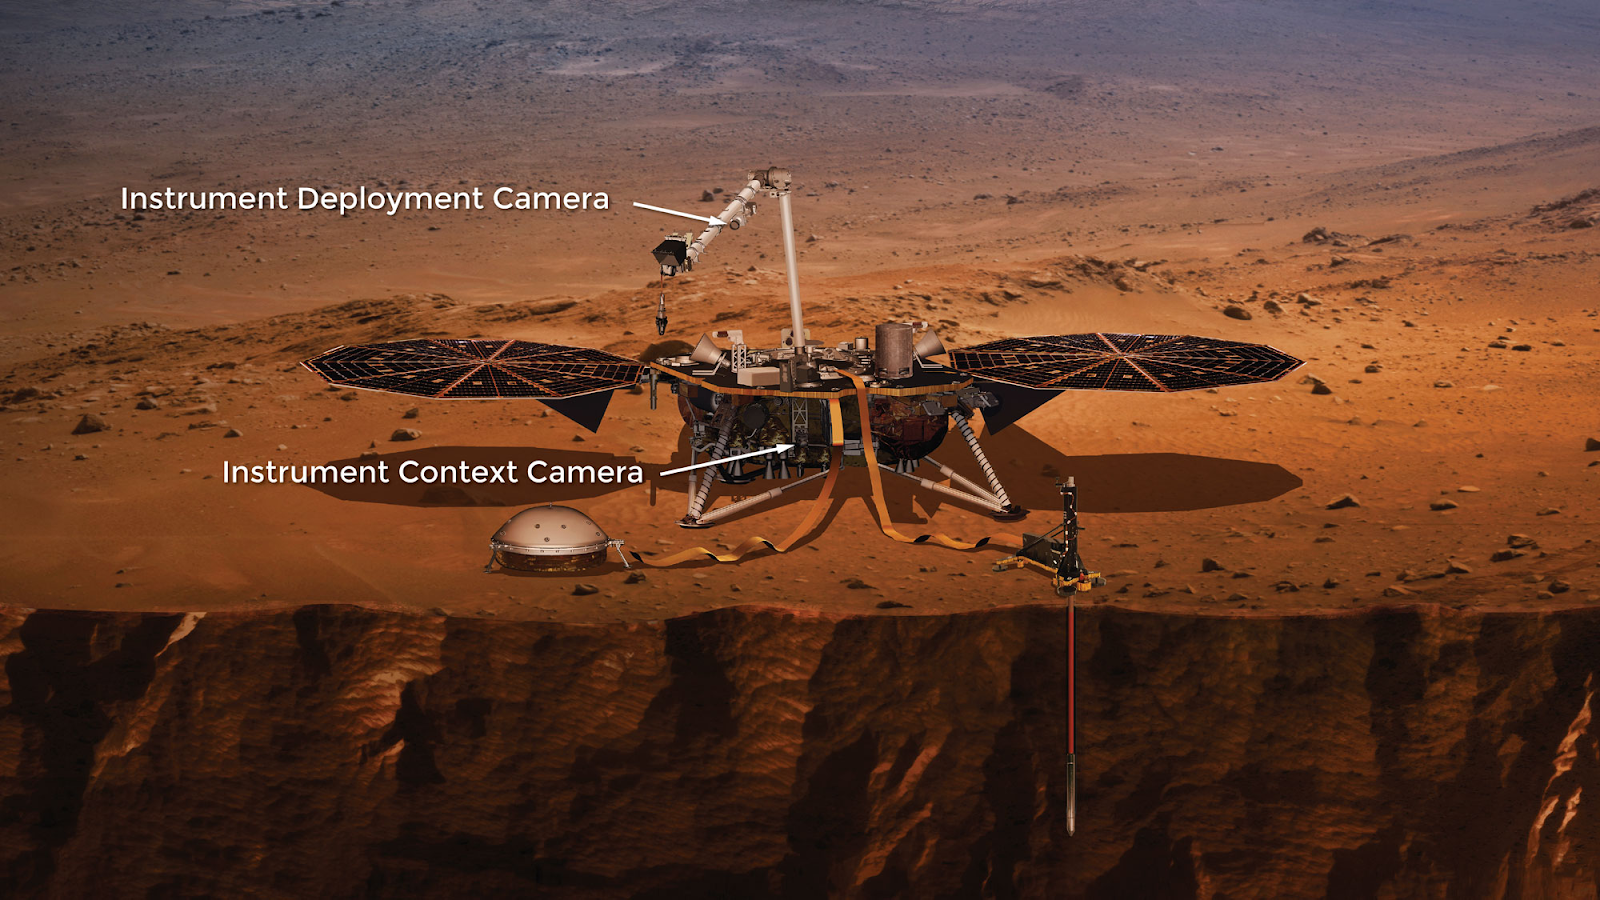 InSight lander with the Instrument Deployment Camera and the